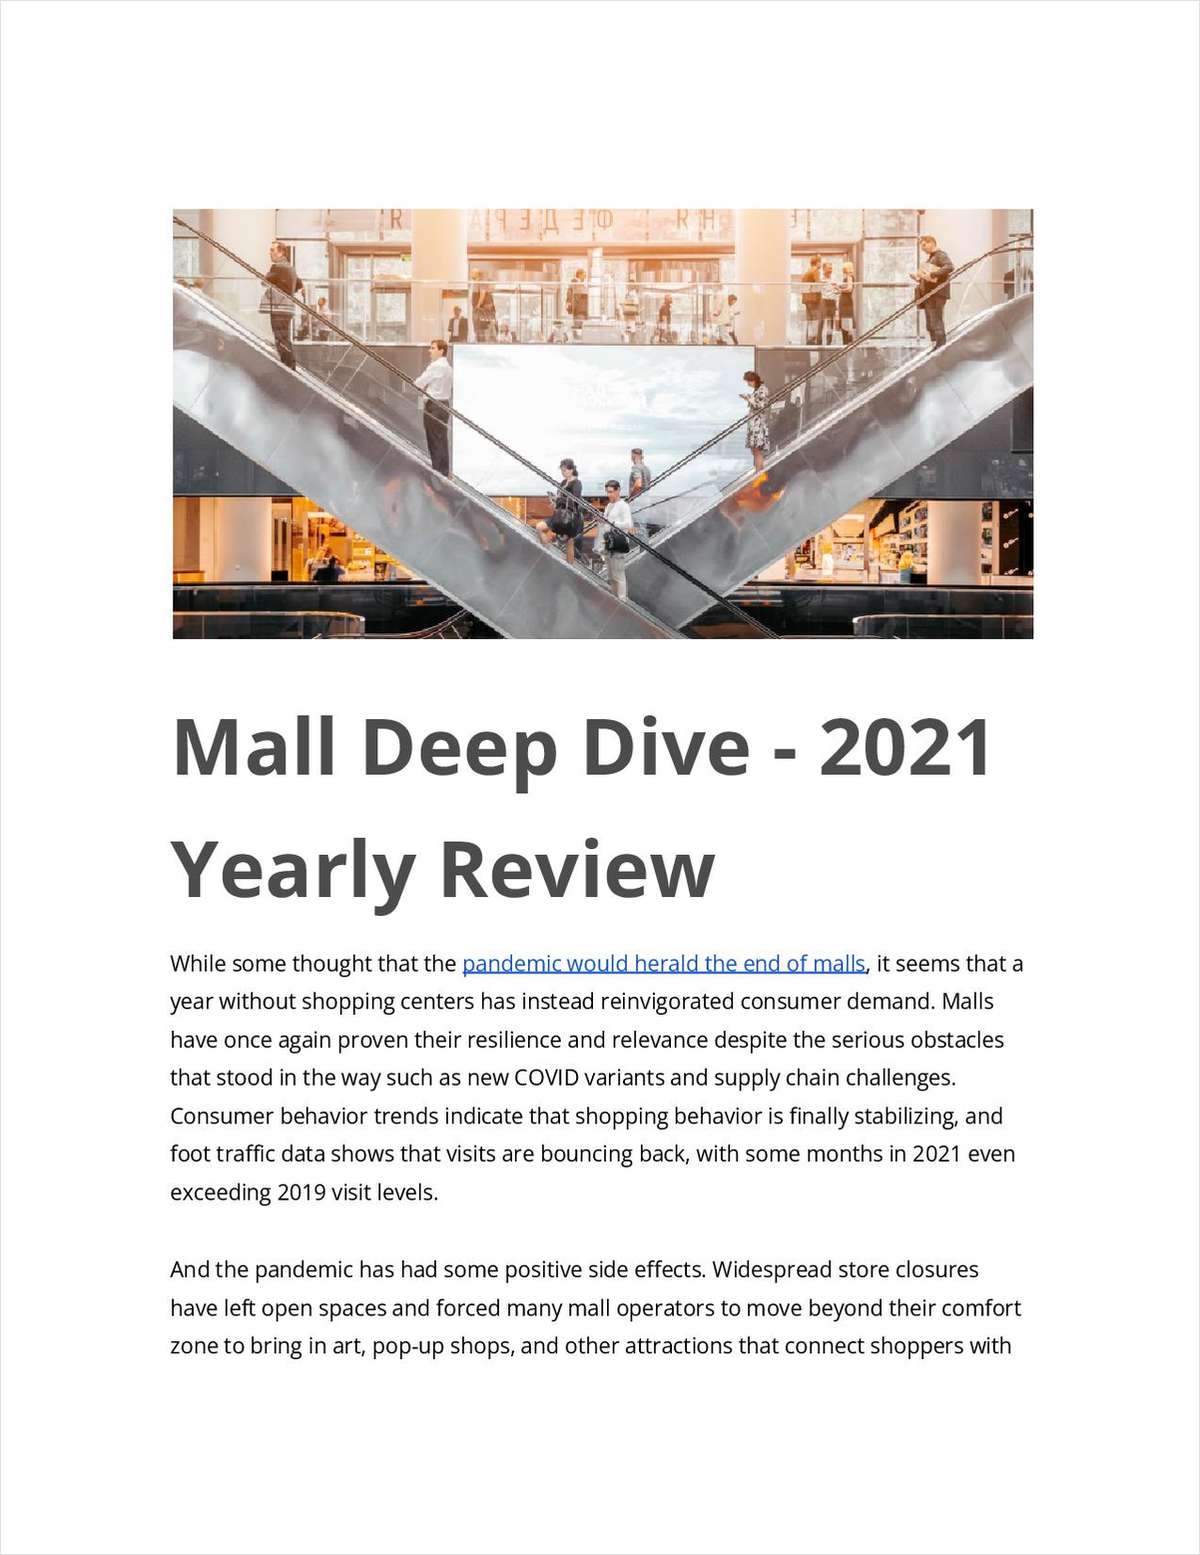 Mall Deep Dive - 2021 Yearly Review